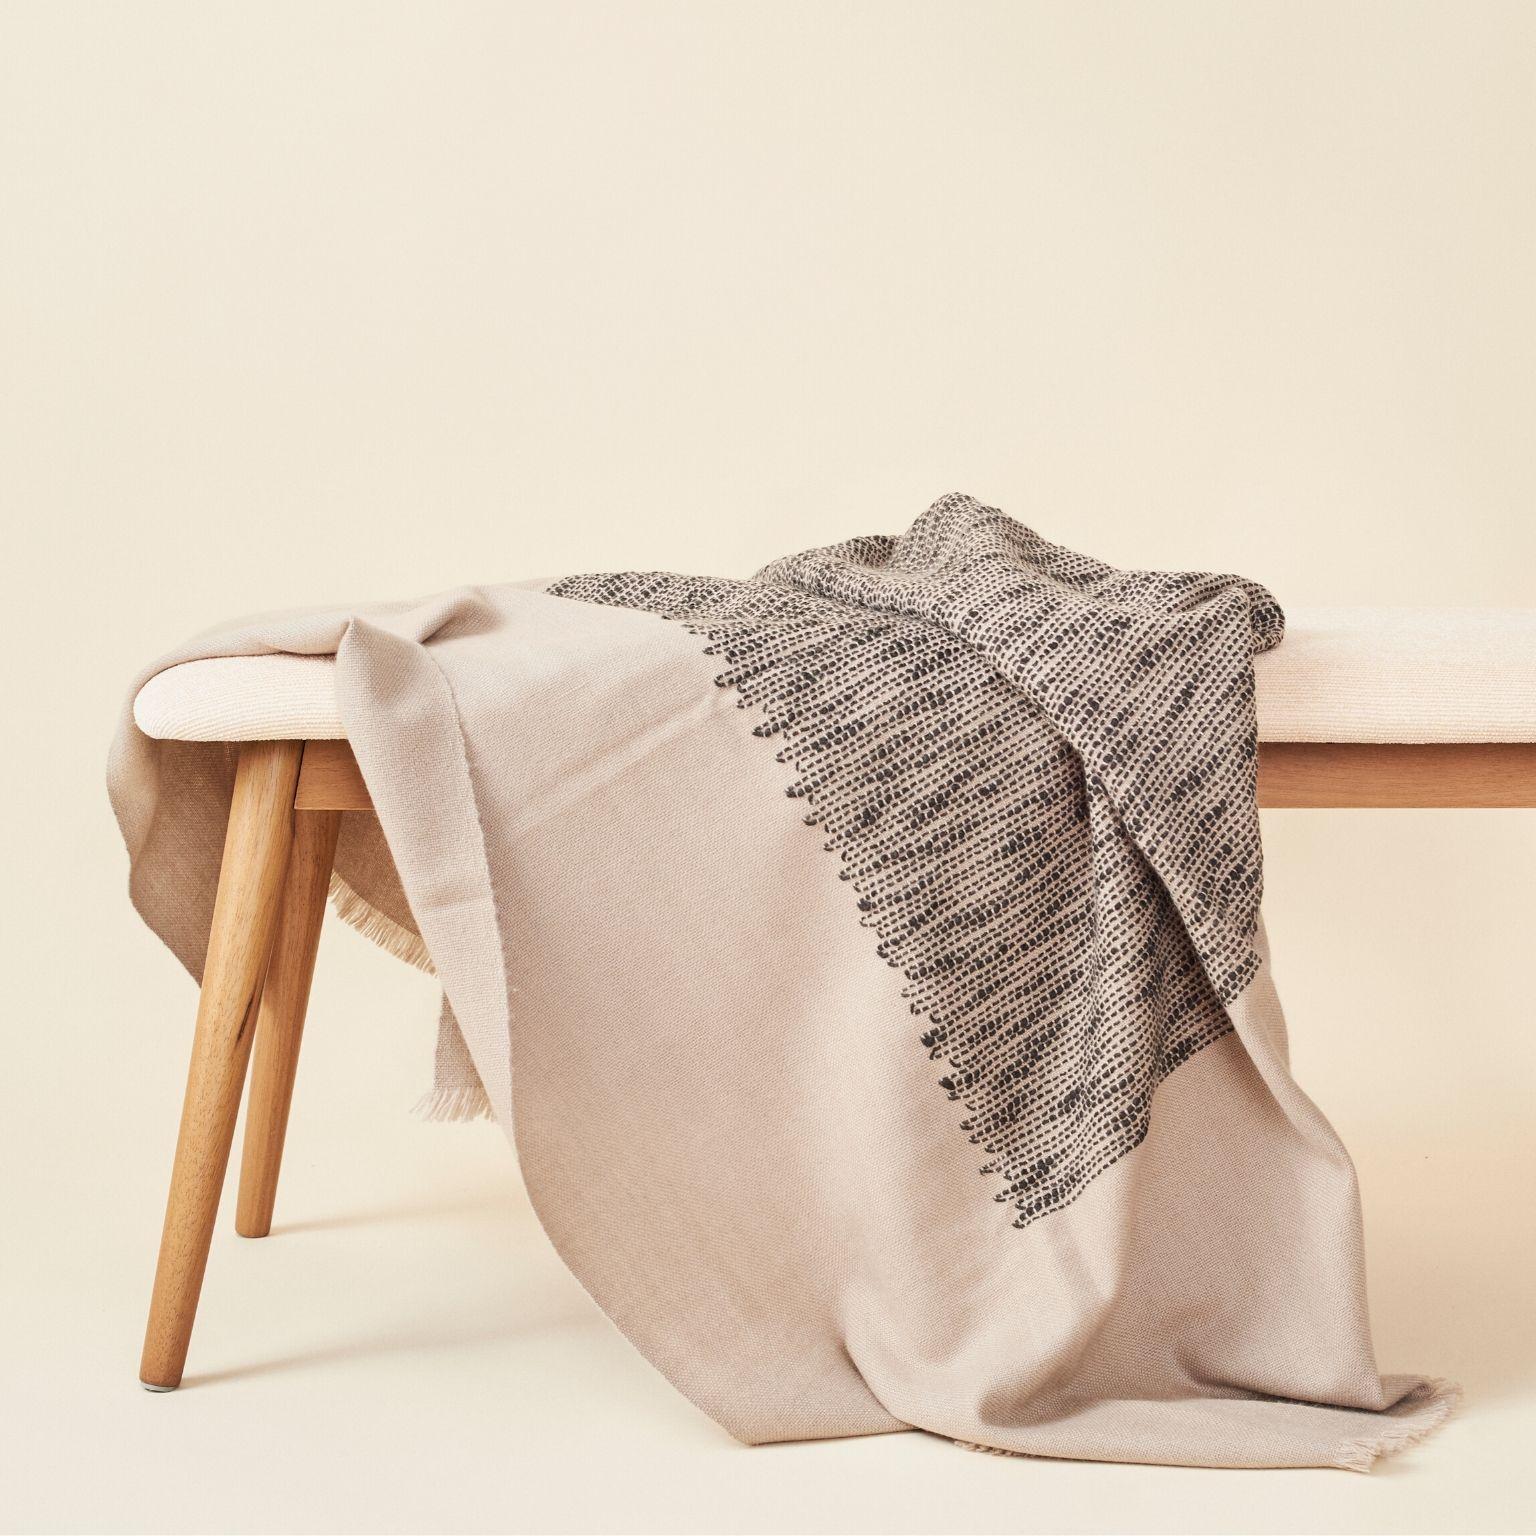 Yarn FLO Brown Throw Handwoven In Soft Merino & Minimal Pattern Hand Embroidered   For Sale